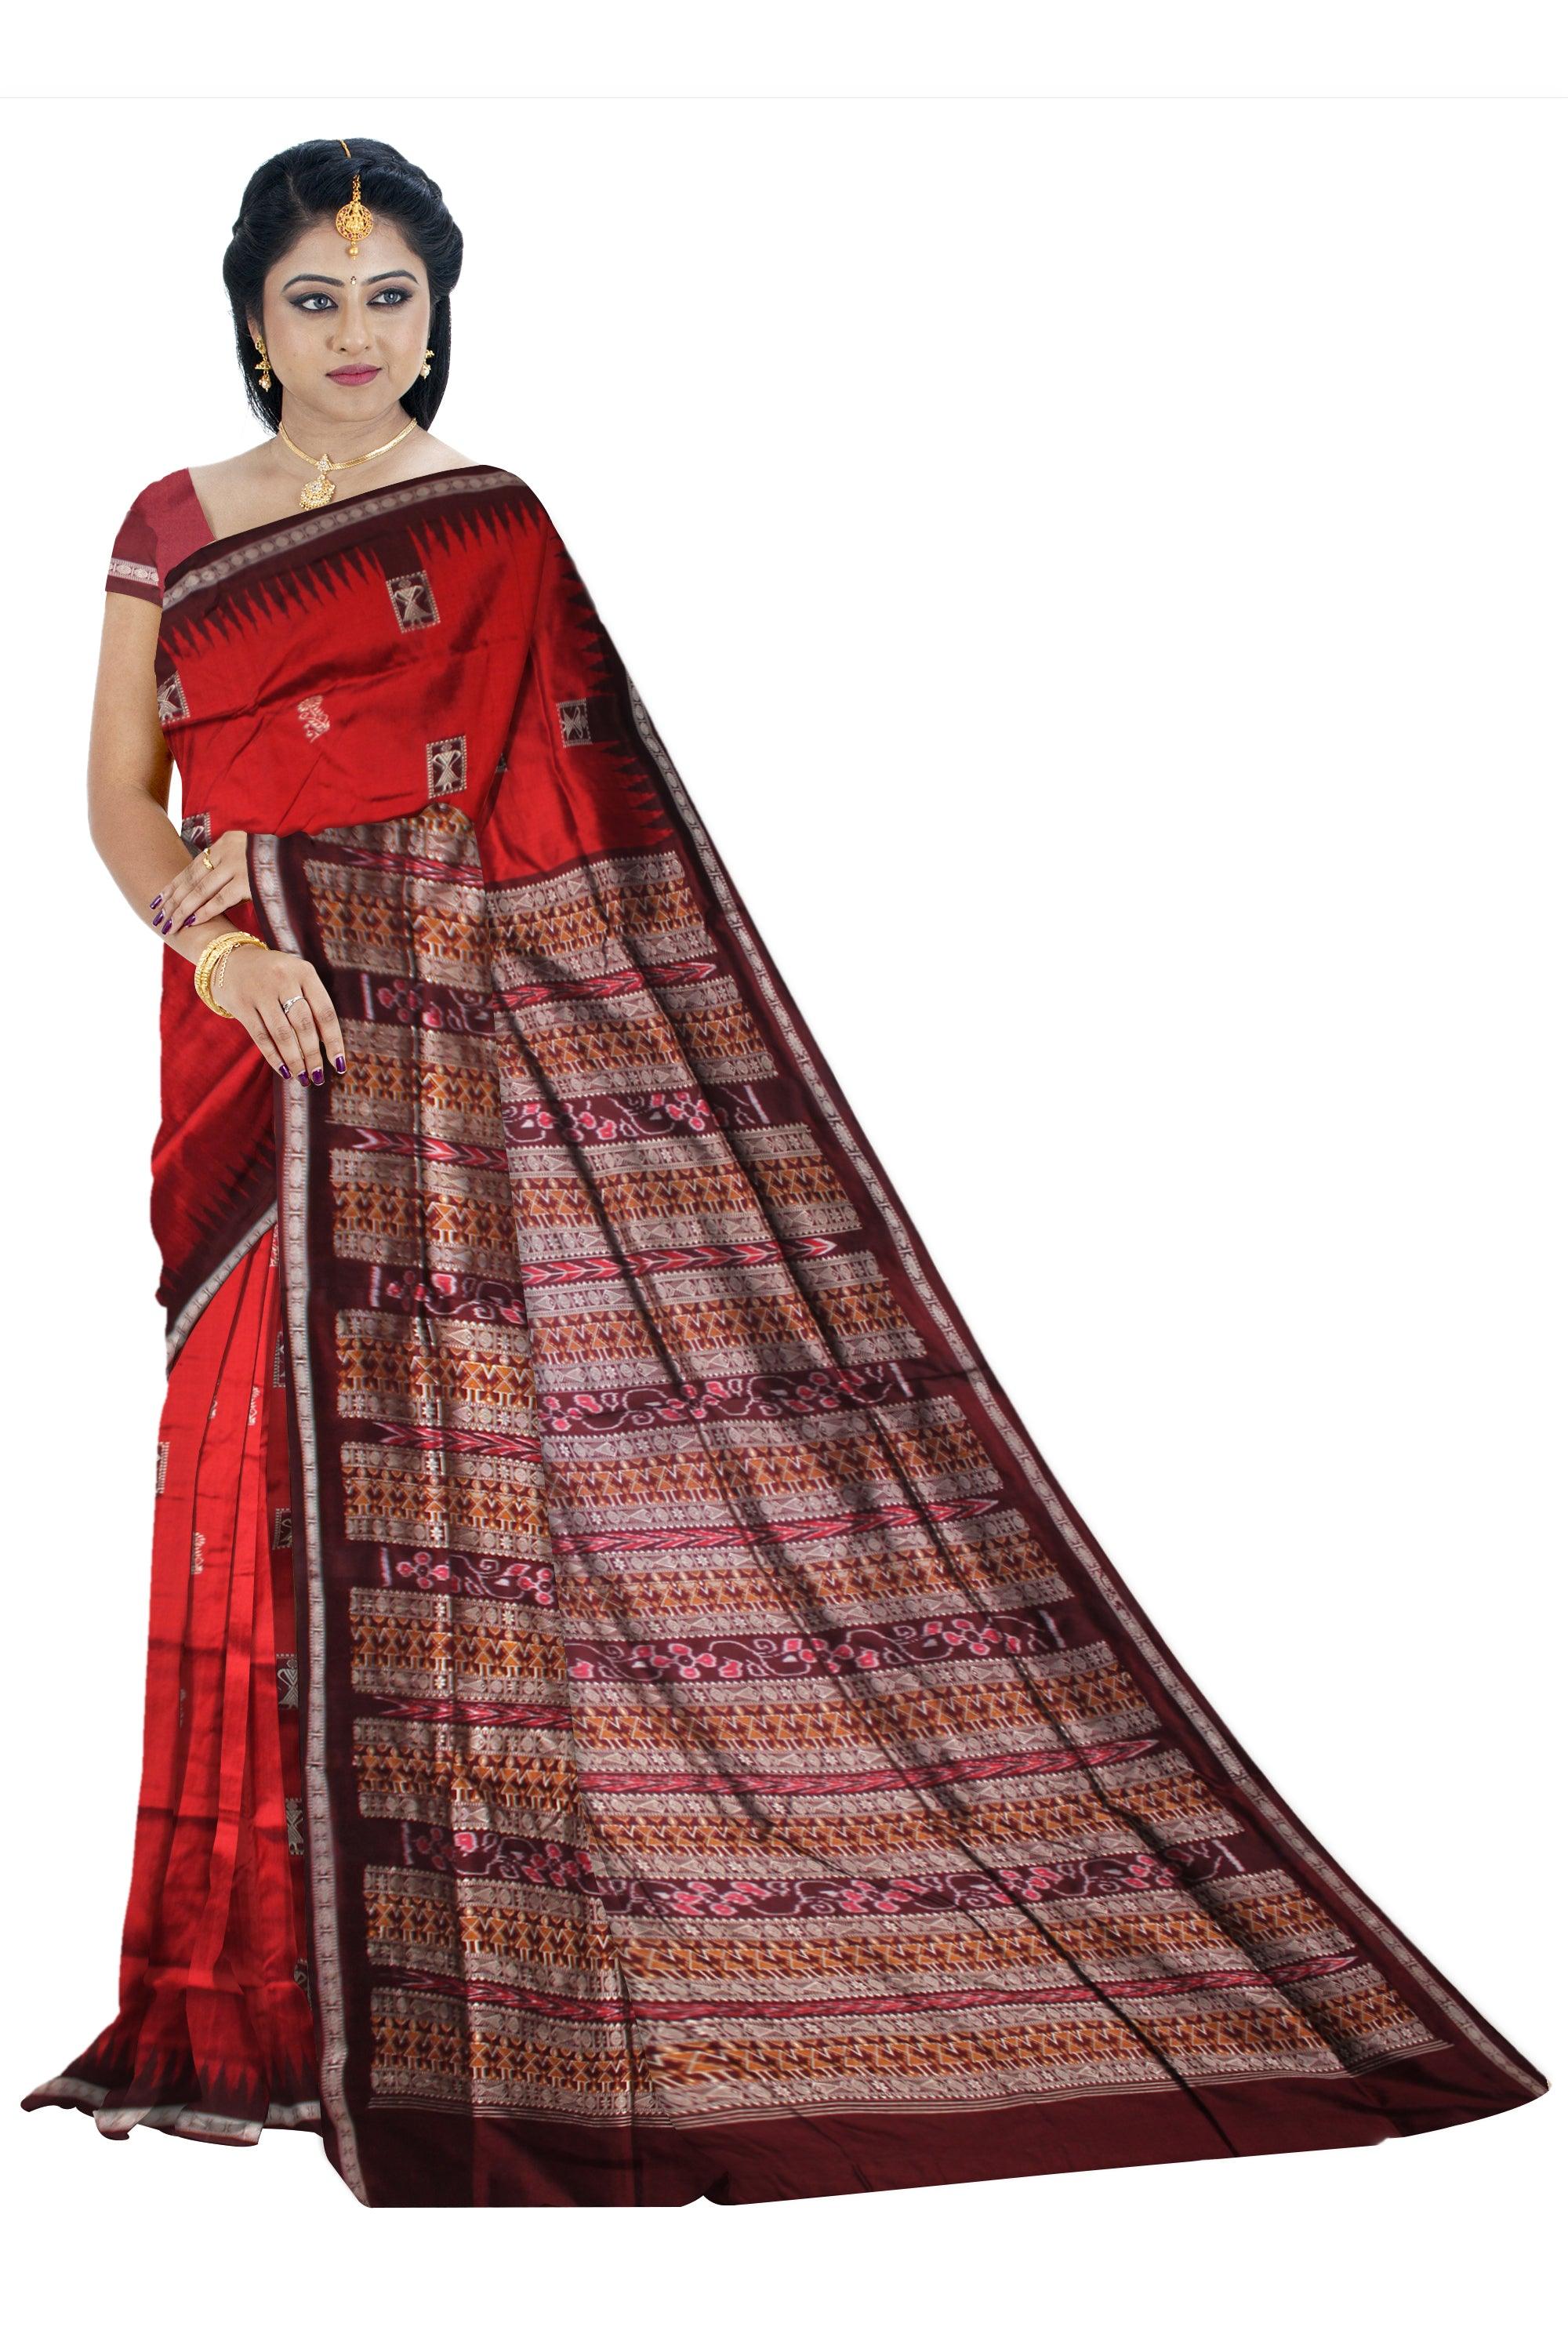 MARRIAGE COLLECTION PATA SAREE IN BANDHA DESIGN IN RED AND COFFEE COLOR , WITH BLOUSE PIECE. - Koshali Arts & Crafts Enterprise